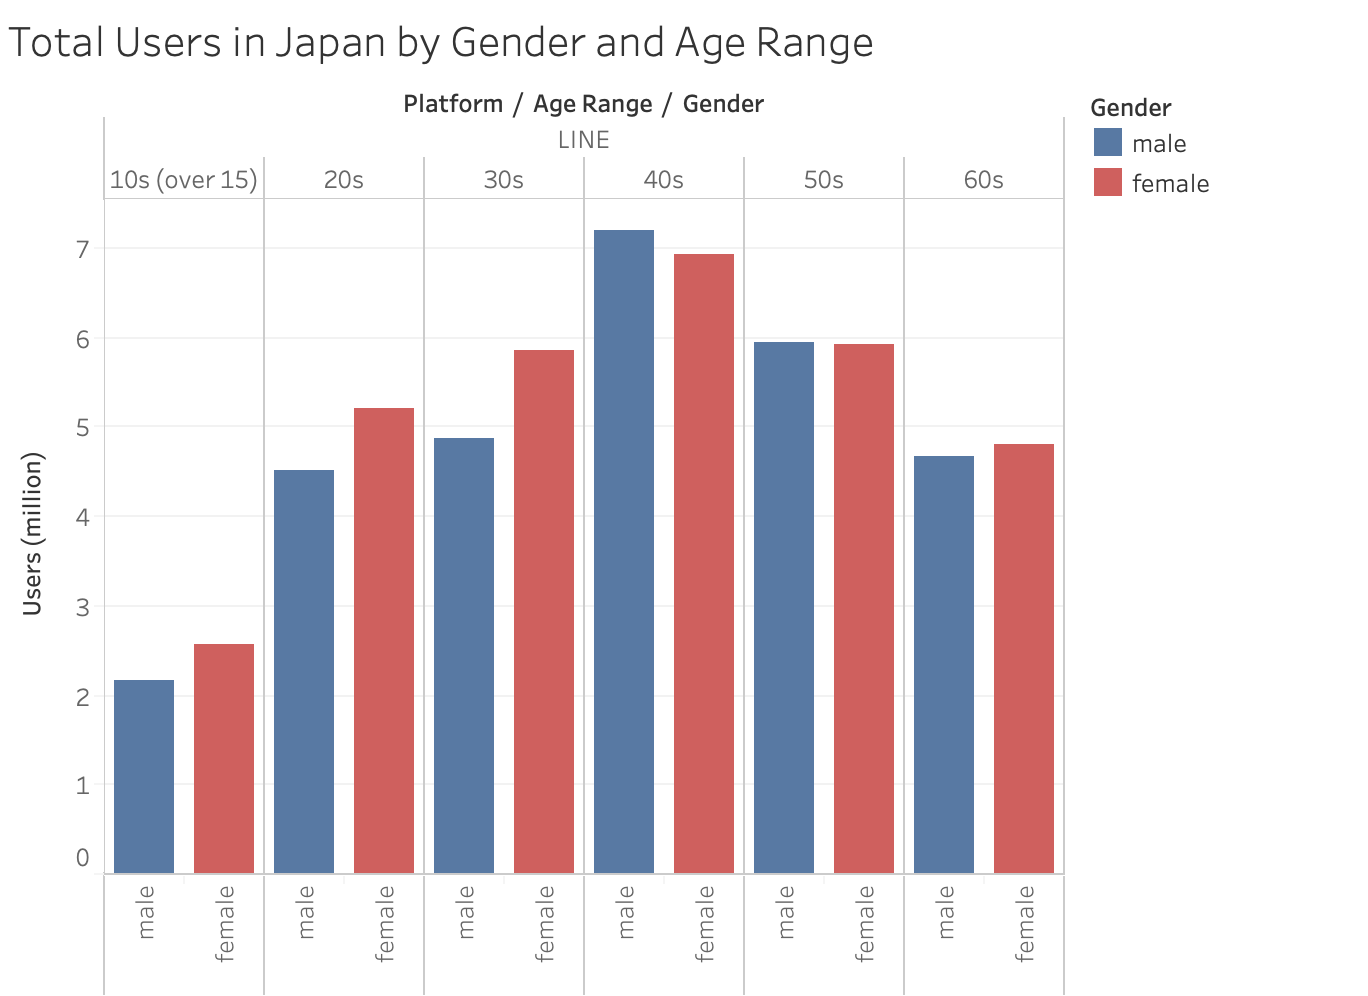 total users in japan by genders and age in LINE